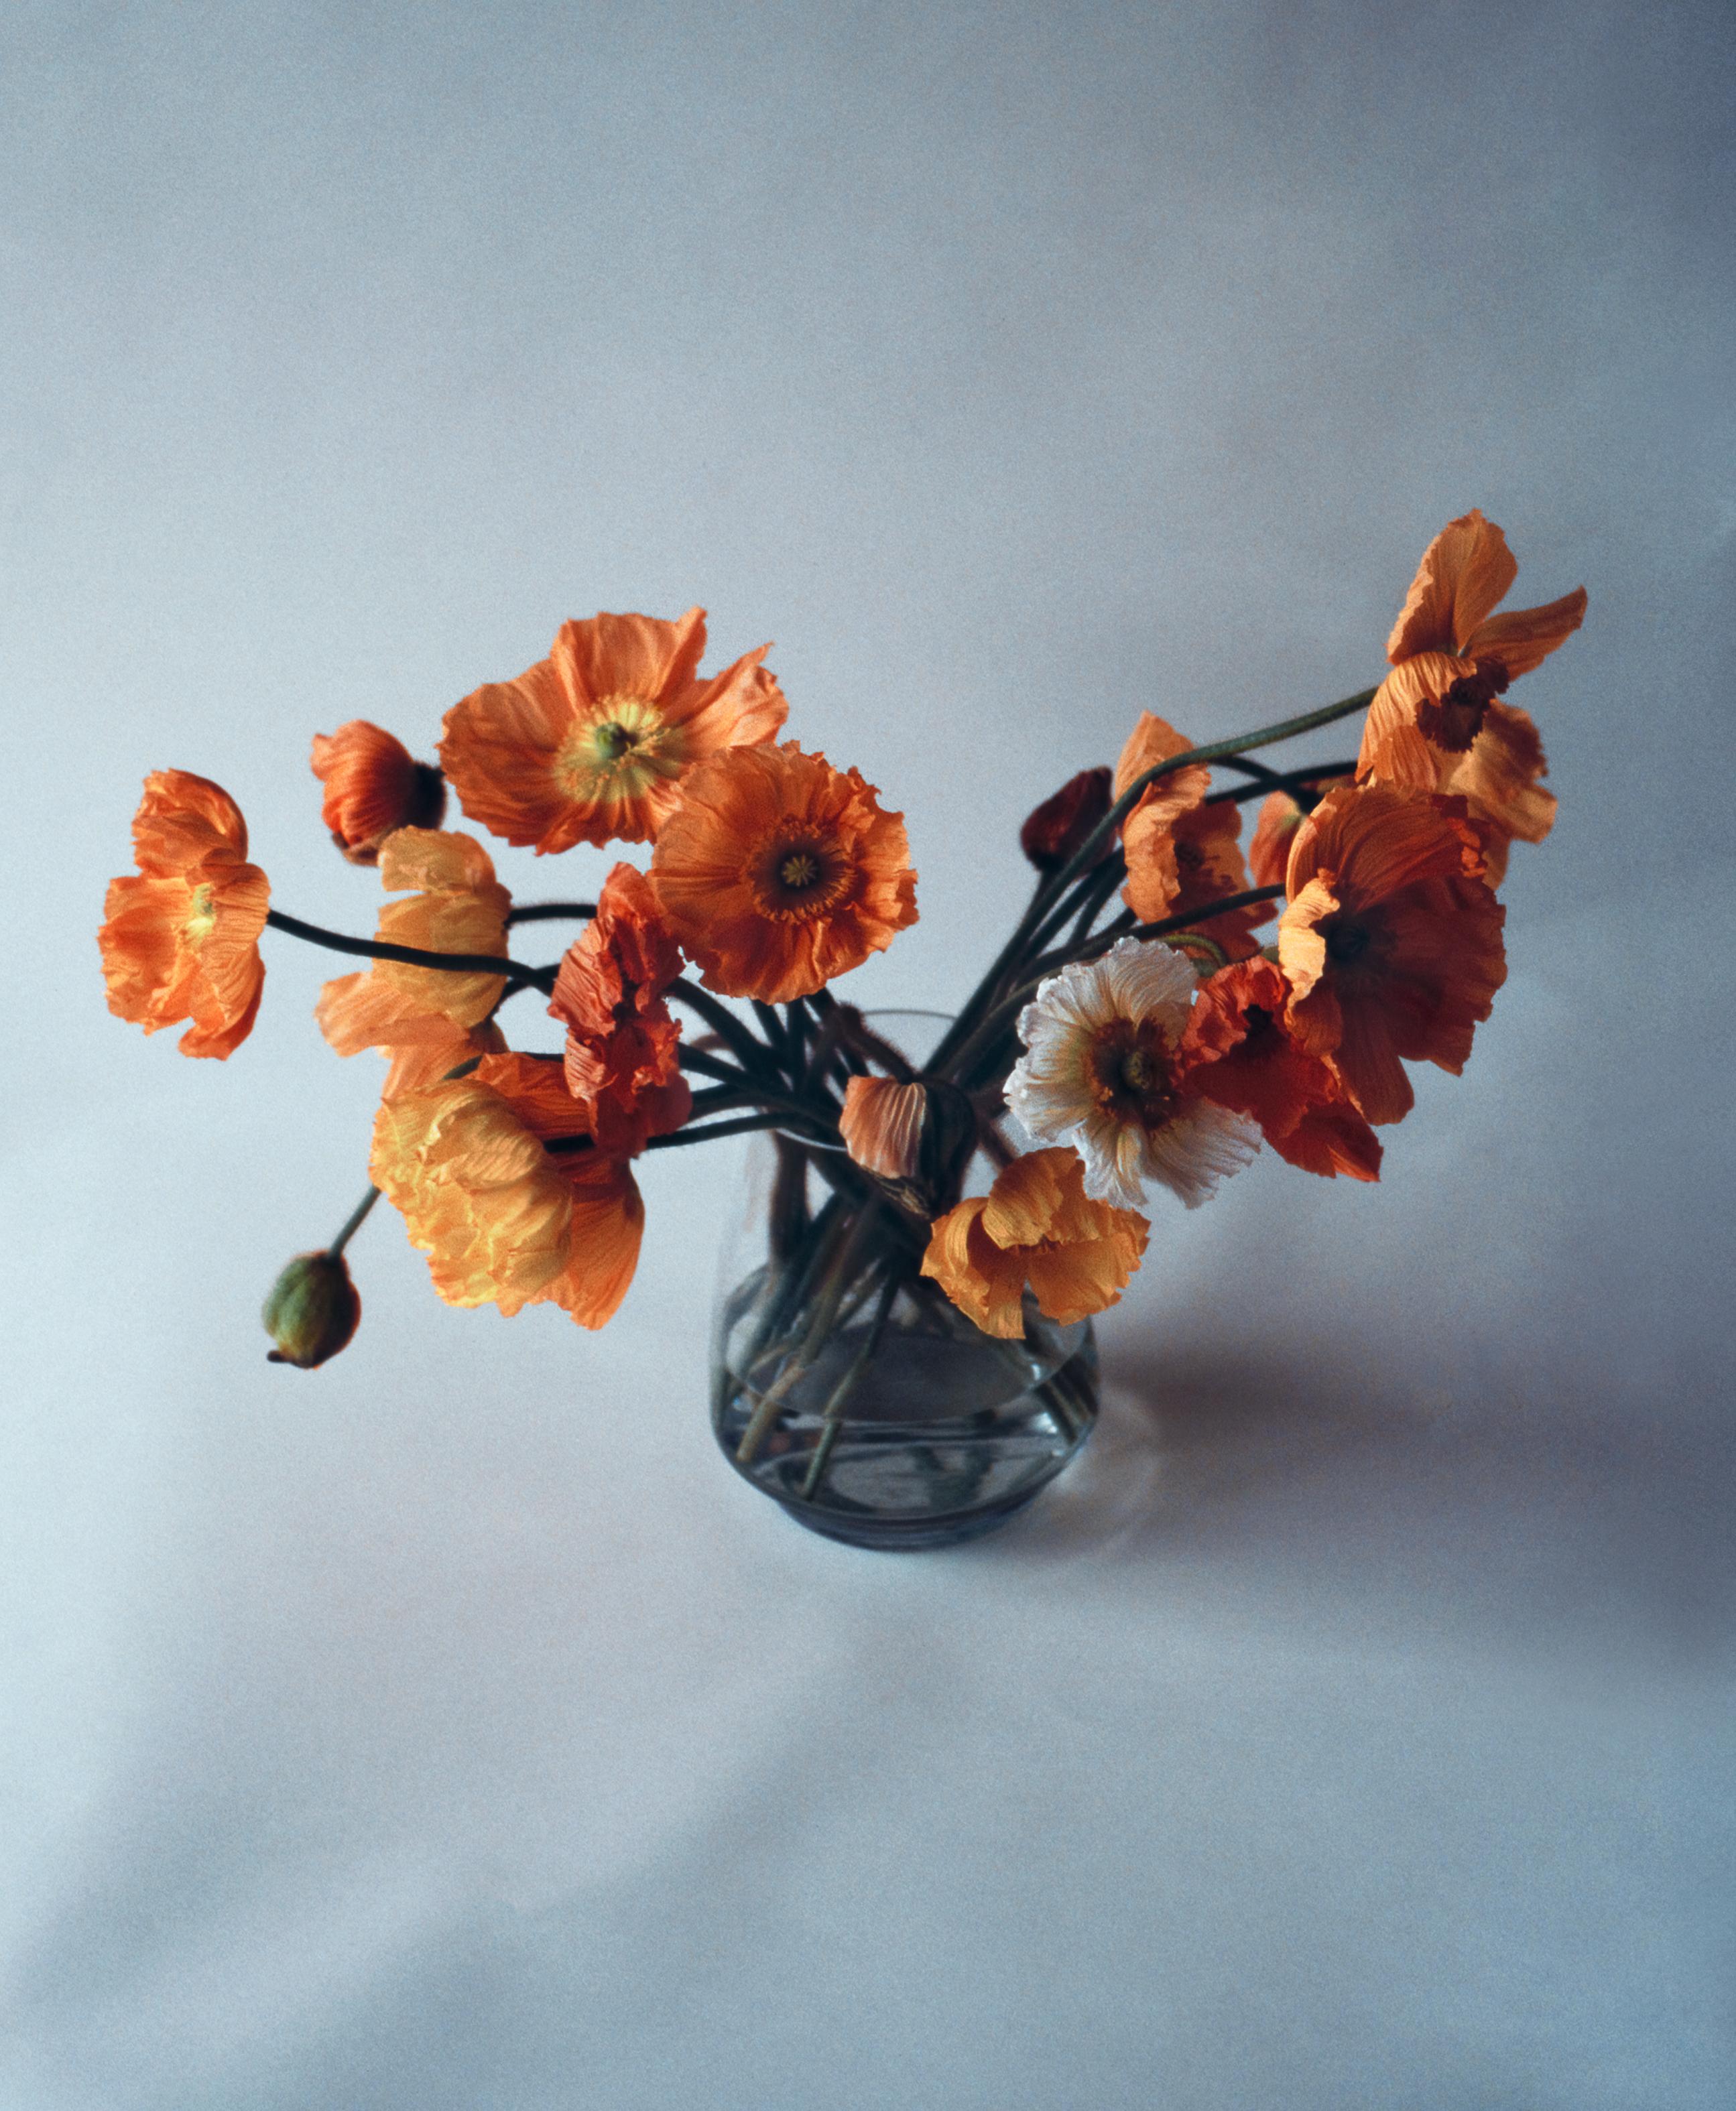 Ugne Pouwell Color Photograph - Orange Poppies No.3 - Analogue floral photography, Limited edition of 20